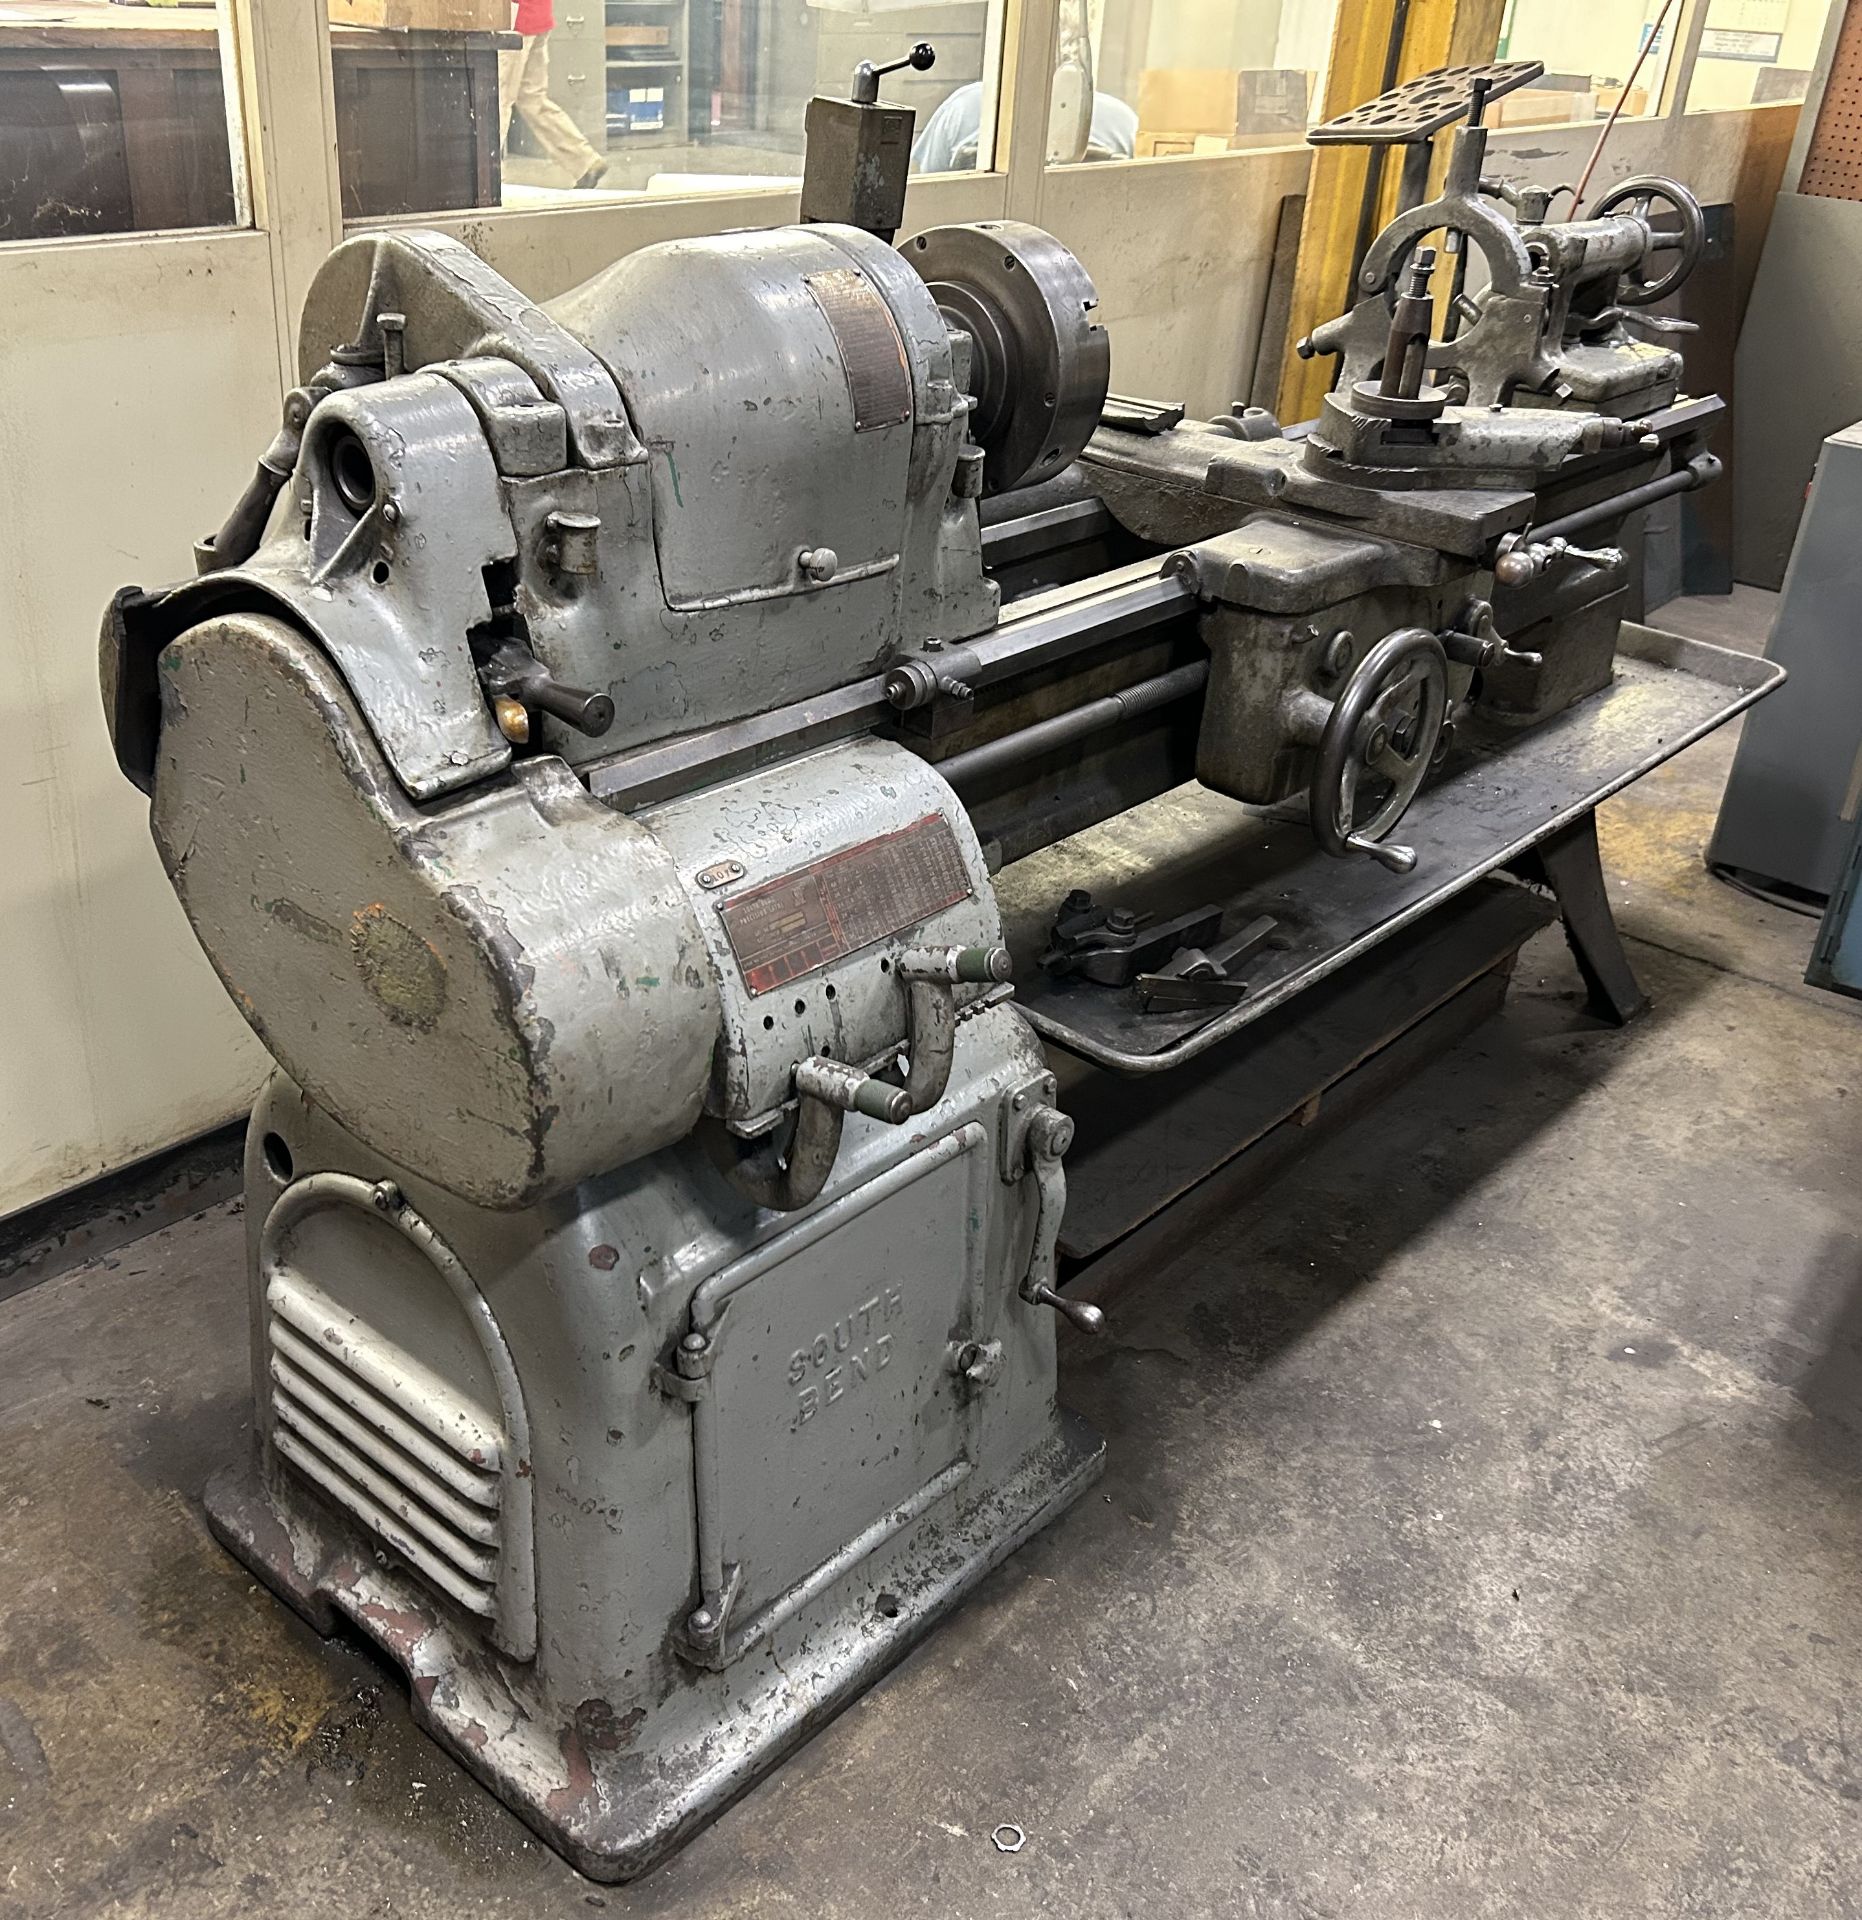 Southbend 16" x 44" Toolroom Lathe - S/N 5312HKR10, 10" 3 Jaw Chuck, Taper Attachment, Steady